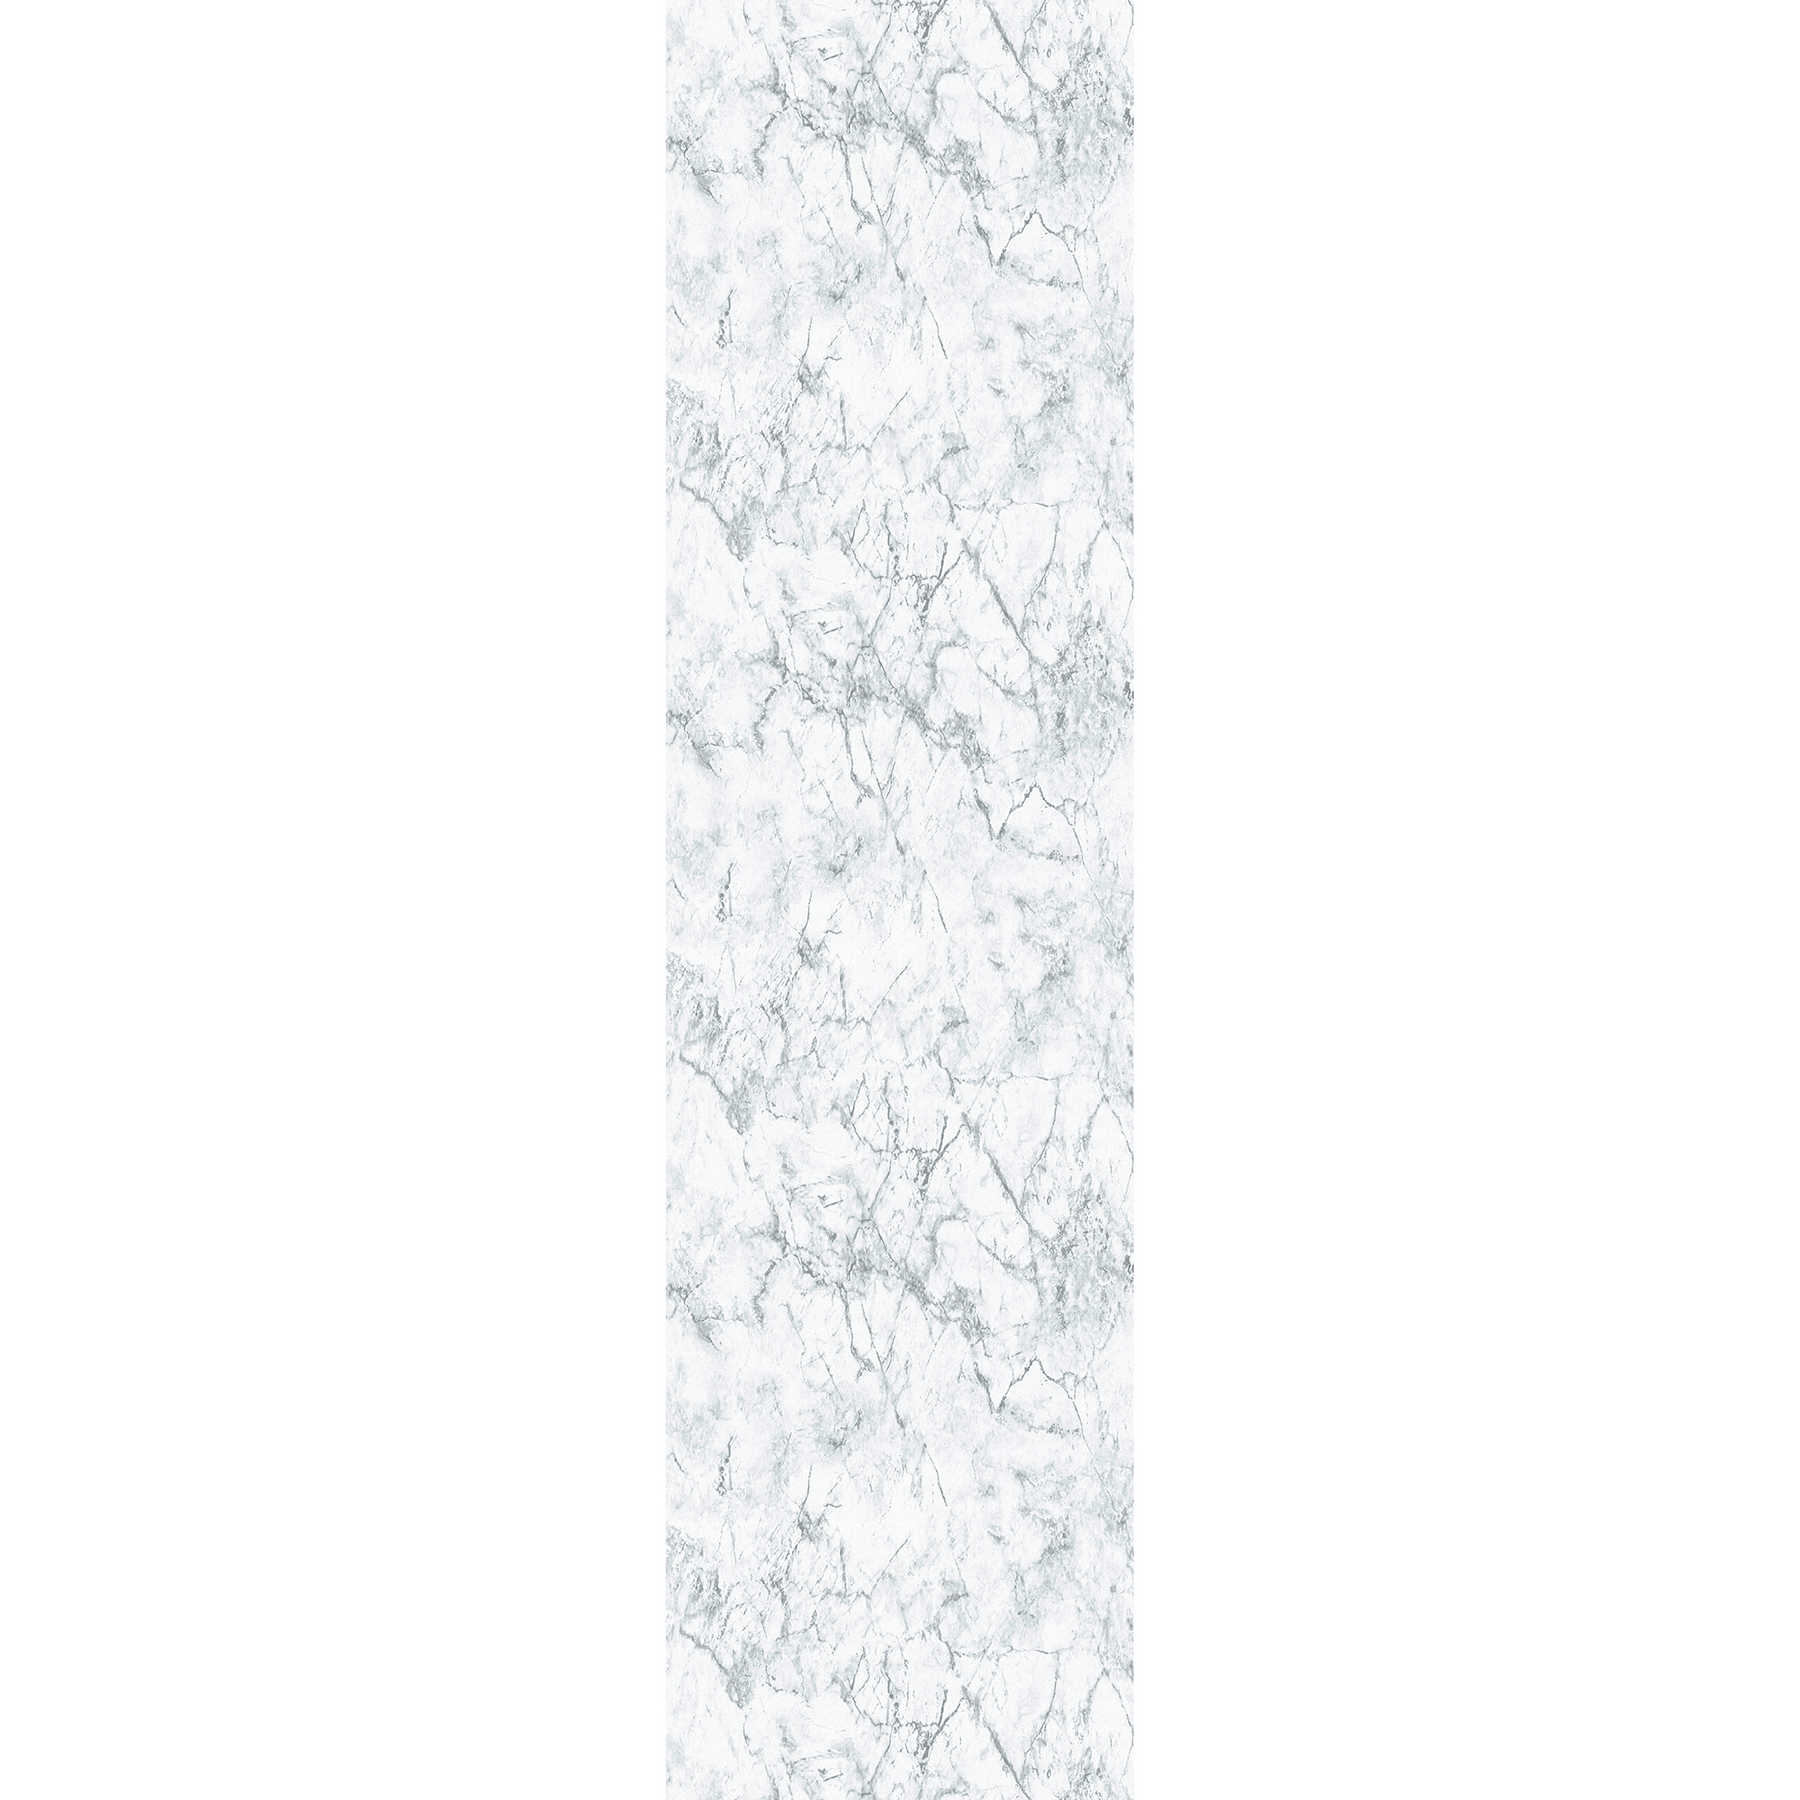         Marble wallpaper marbled stone look - grey, white
    